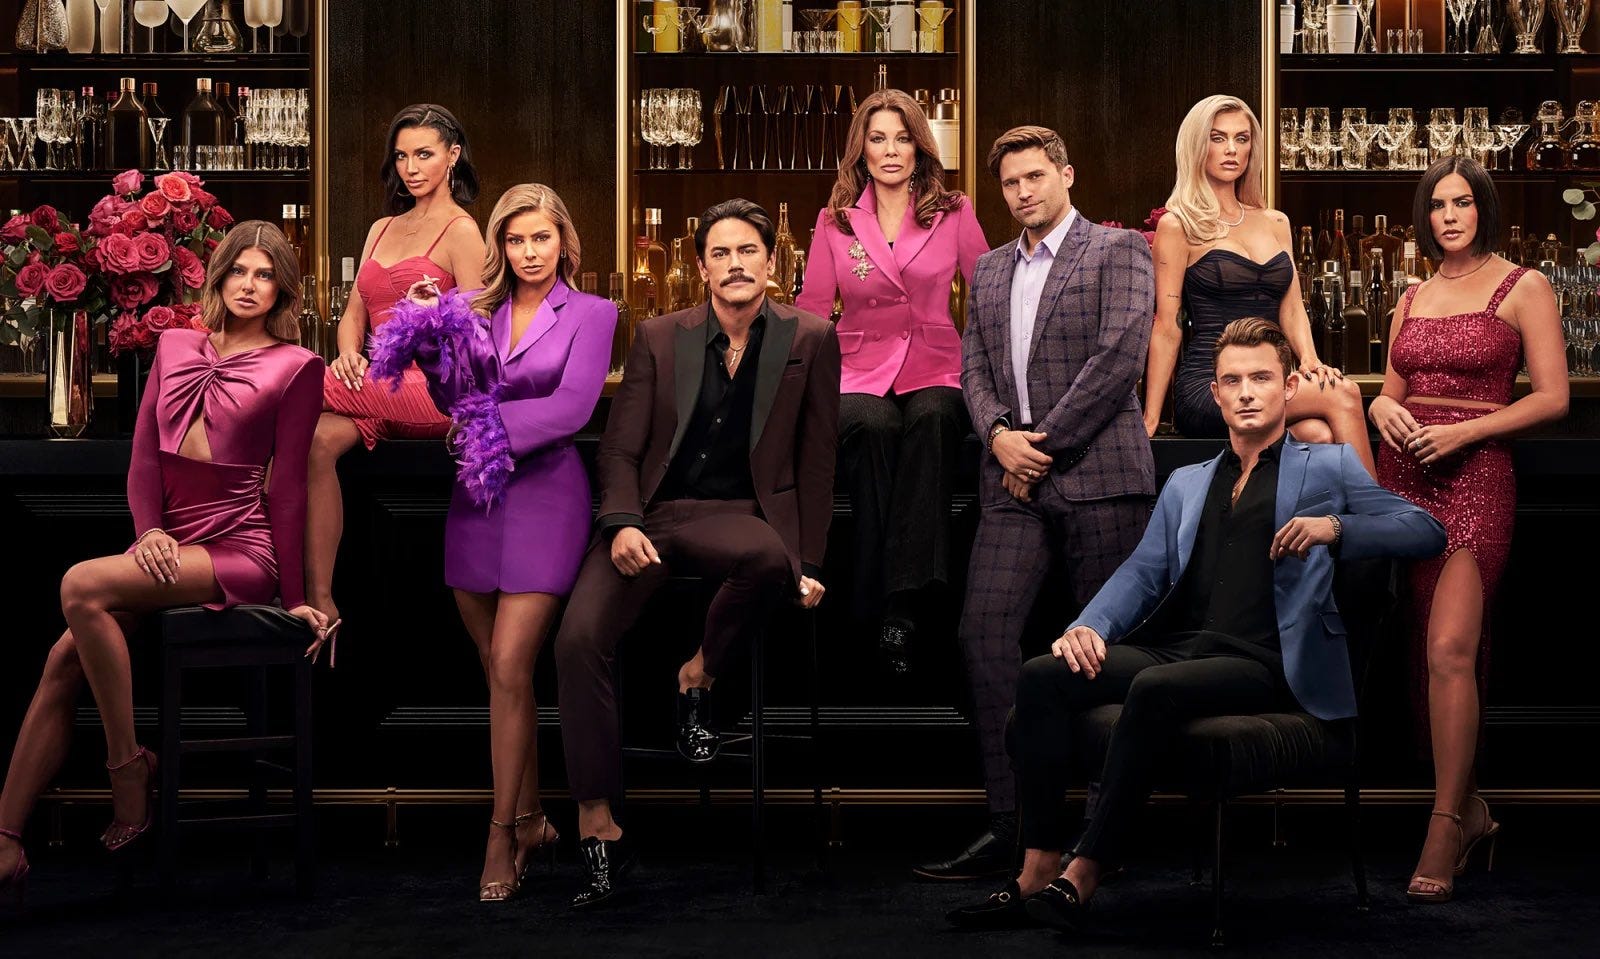 The Best Articles I Read About The 'Vanderpump Rules' Finale